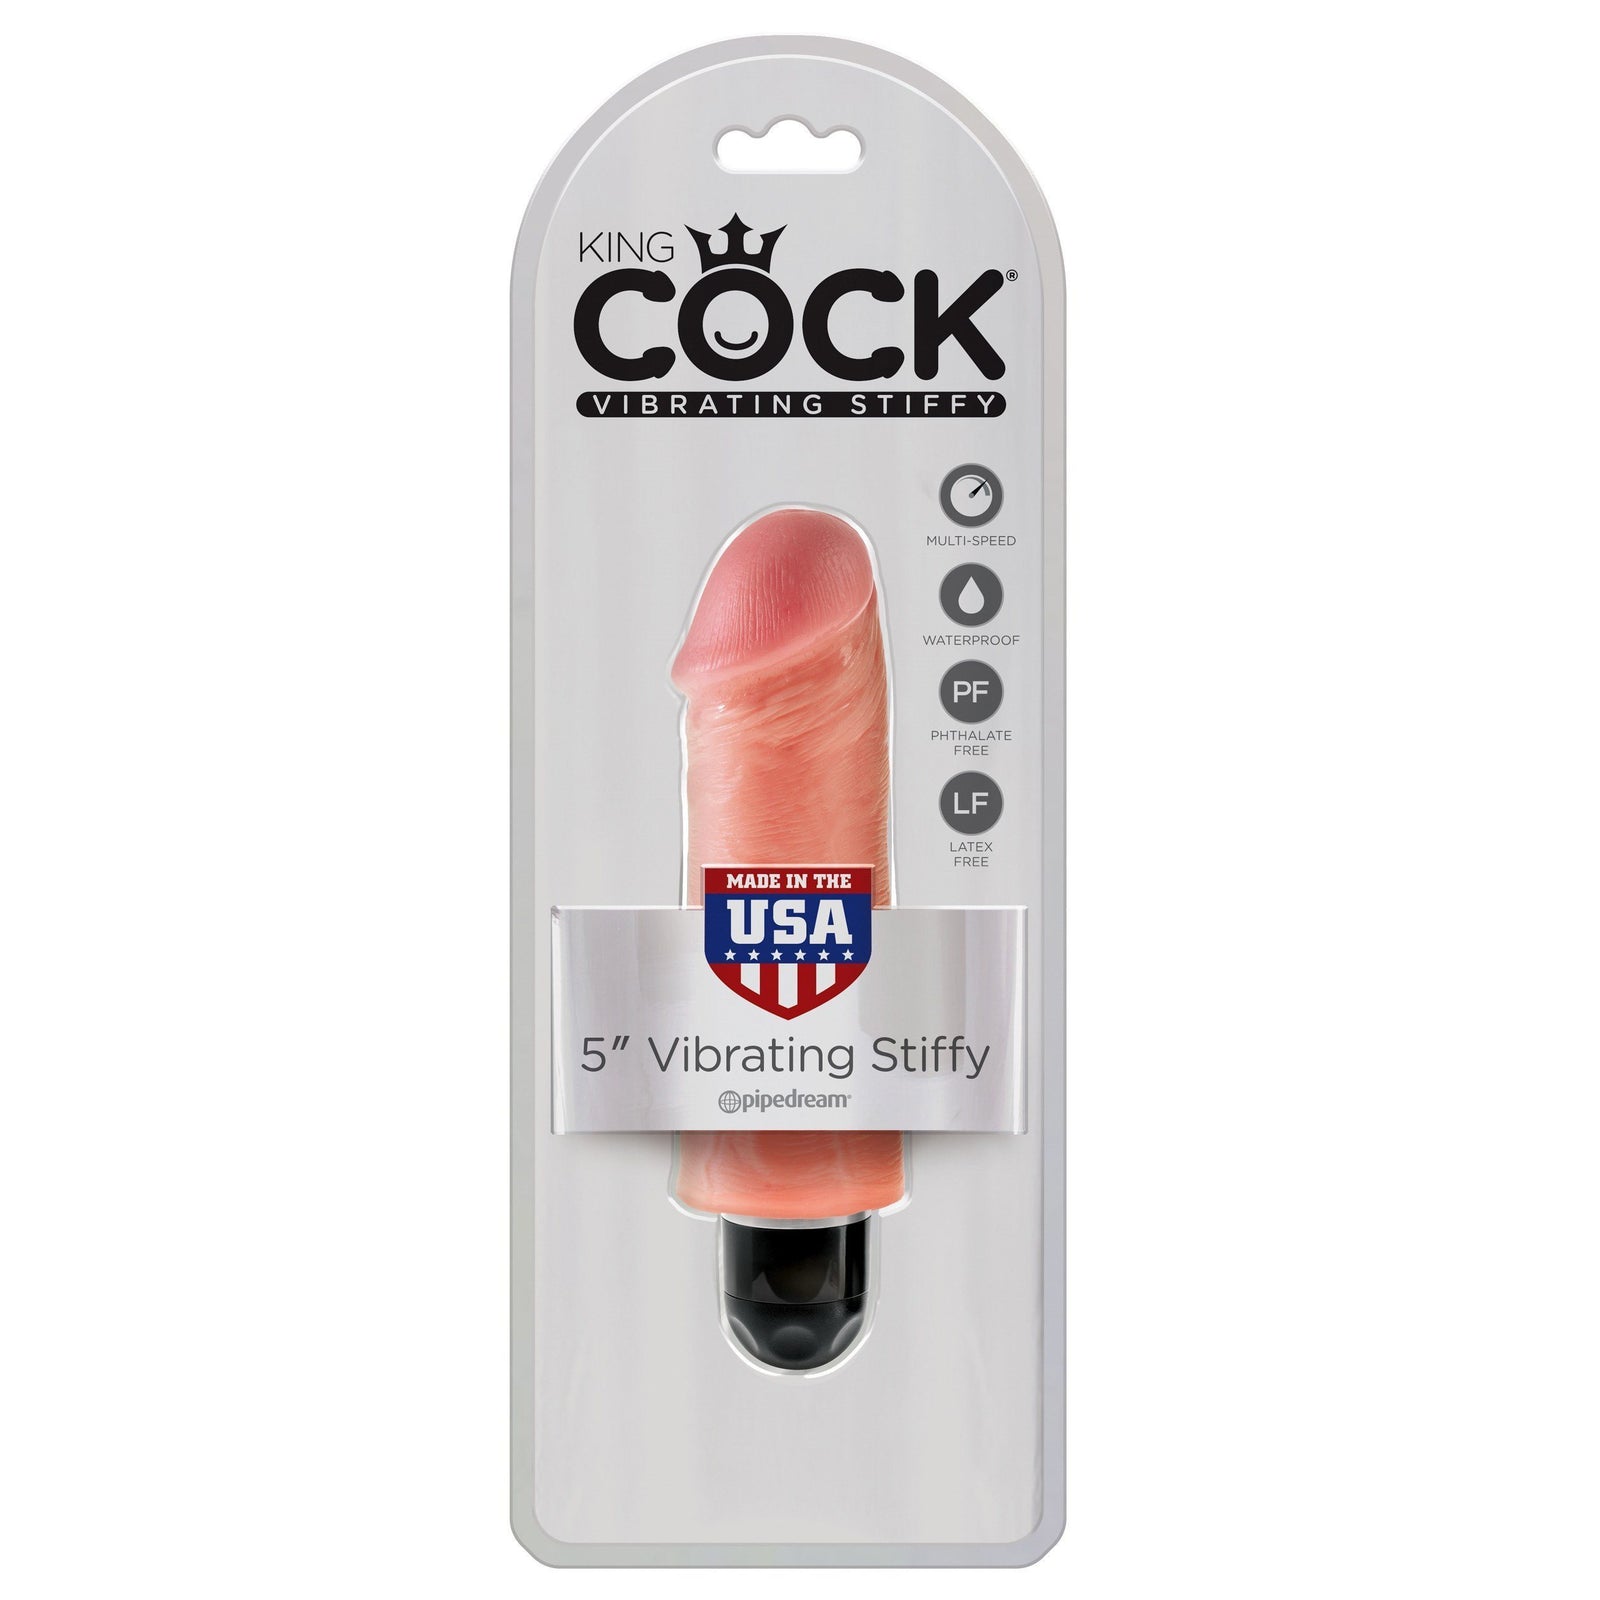 Pipedream - King Cock 5" Vibrating Stiffy Cock (Beige) Non Realistic Dildo w/o suction cup (Vibration) Non Rechargeable - CherryAffairs Singapore